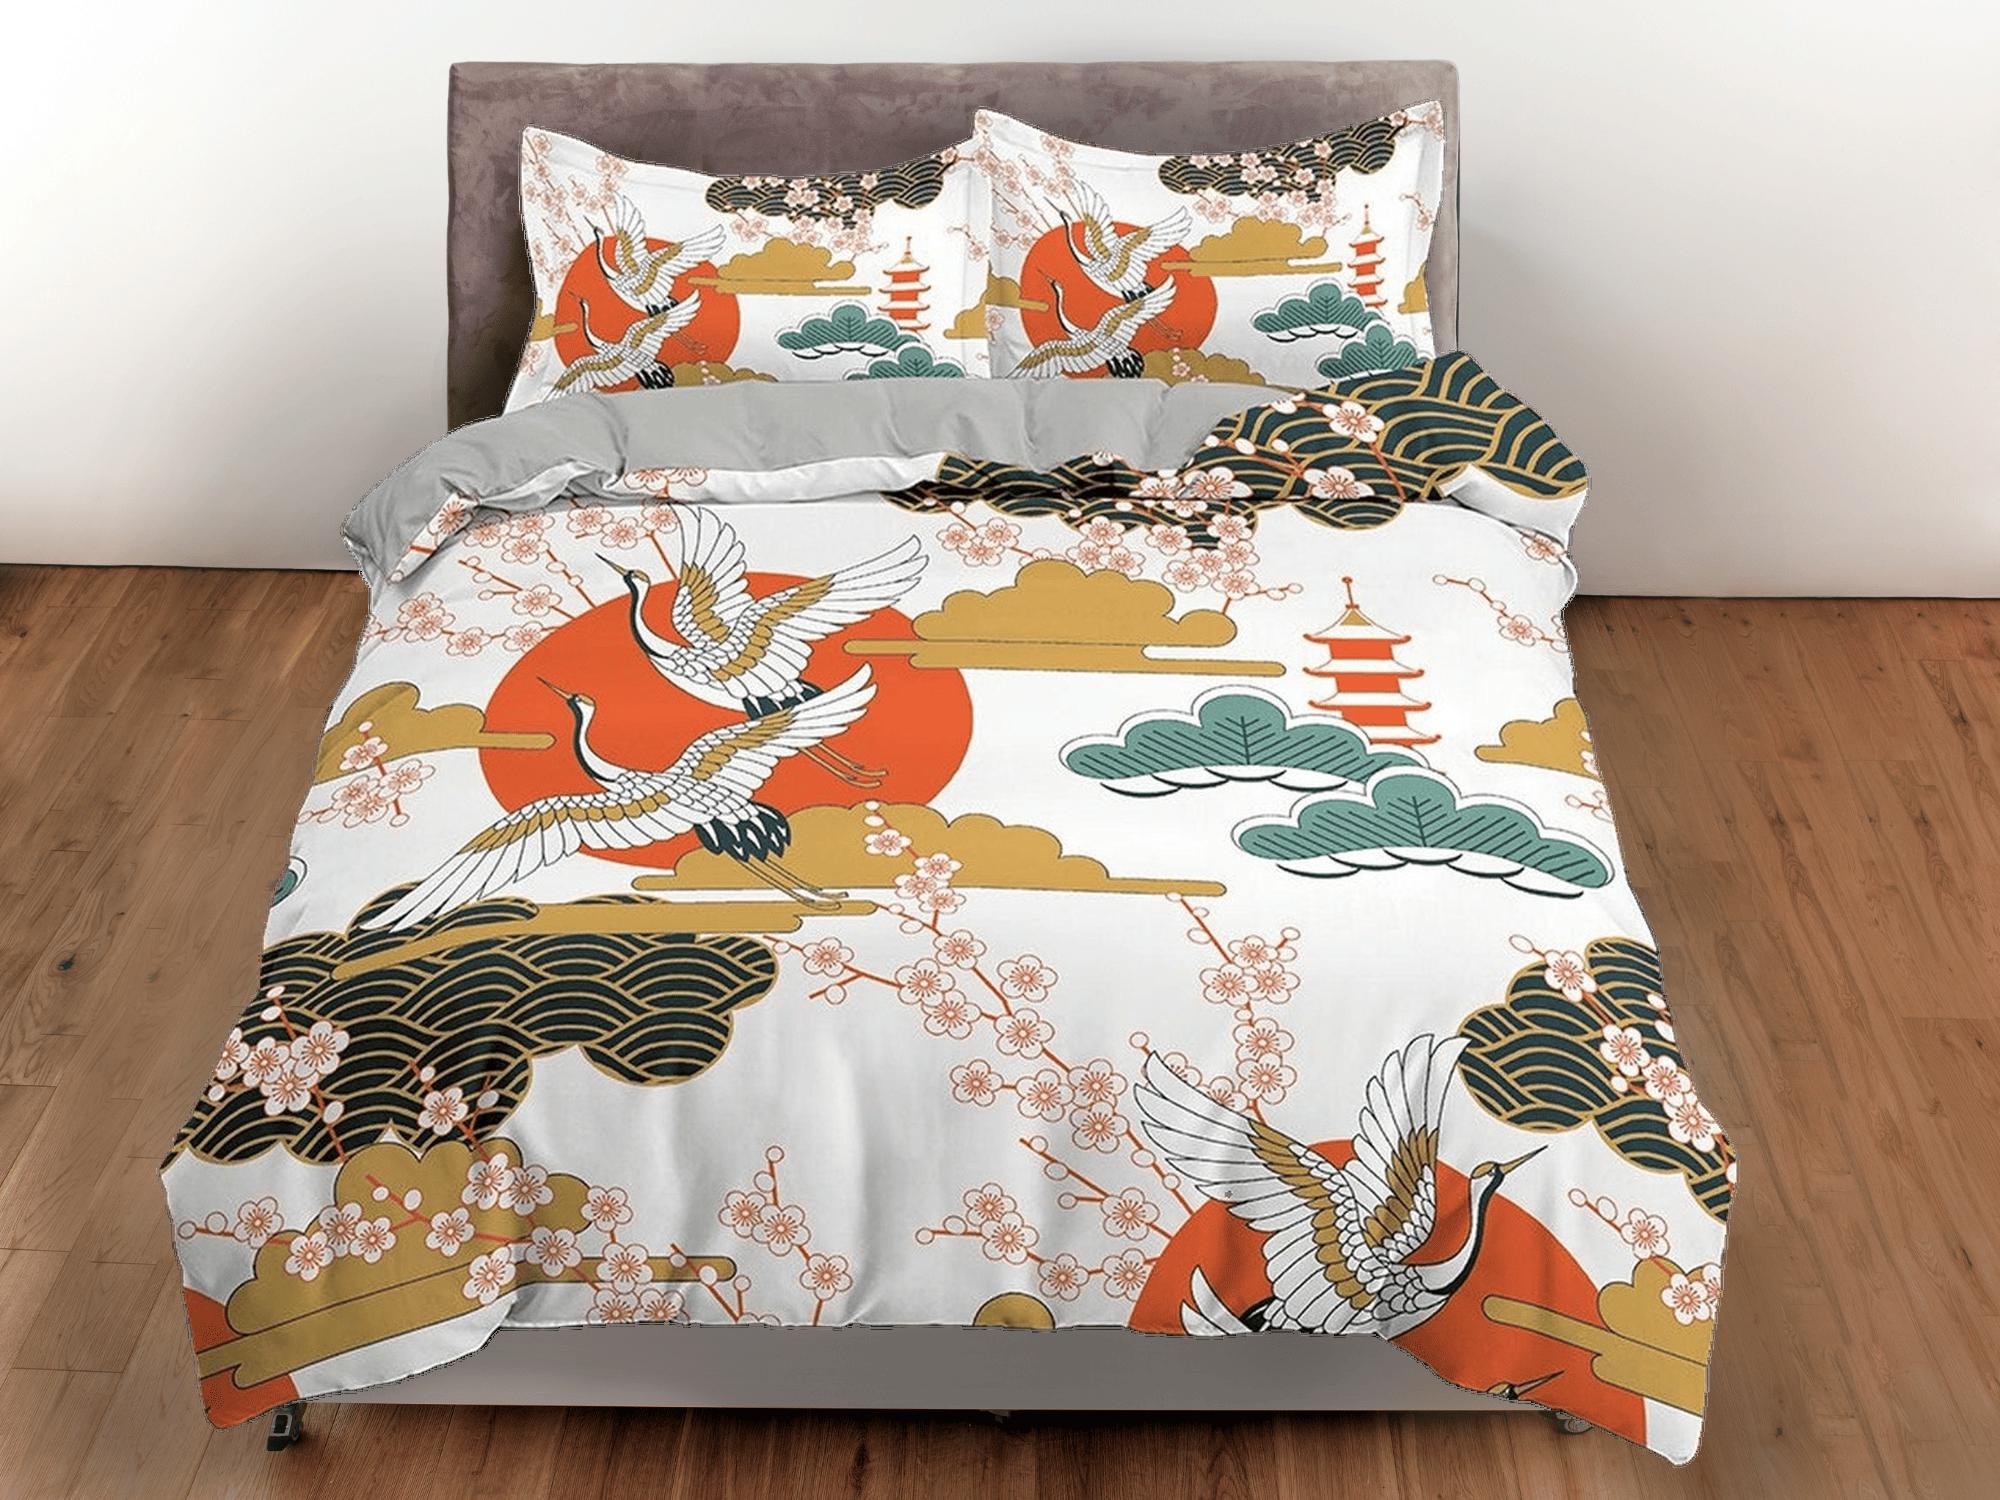 daintyduvet White oriental bedding with floral prints, pagoda, crane bird design, Asian duvet cover set with cherry blossom, Japanese bedding